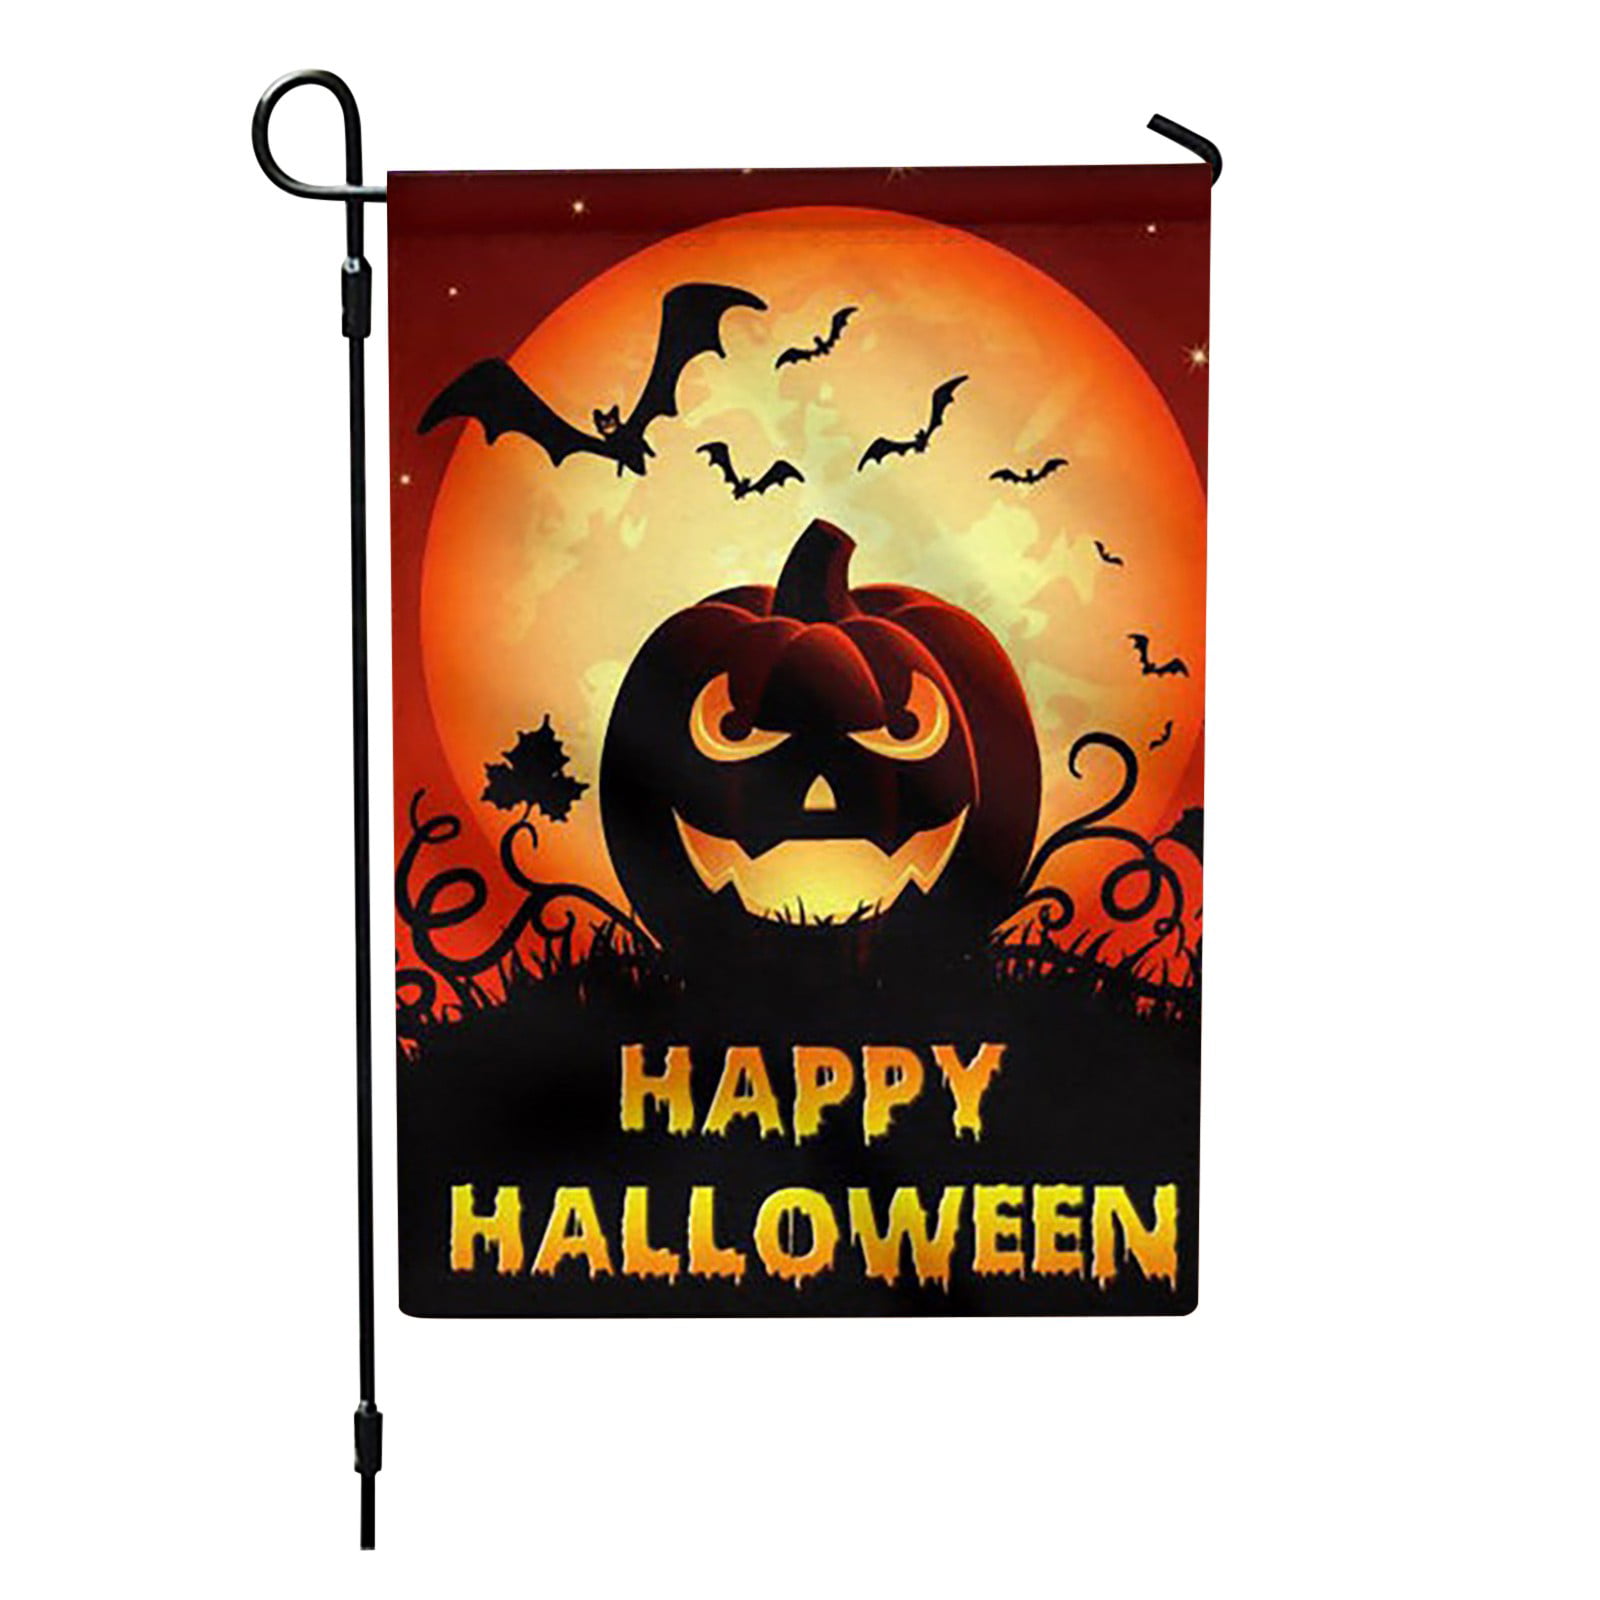 Halloween Pumpkin Flag Holiday Decoration Banner Party Pennant New Outdoor 3x5 